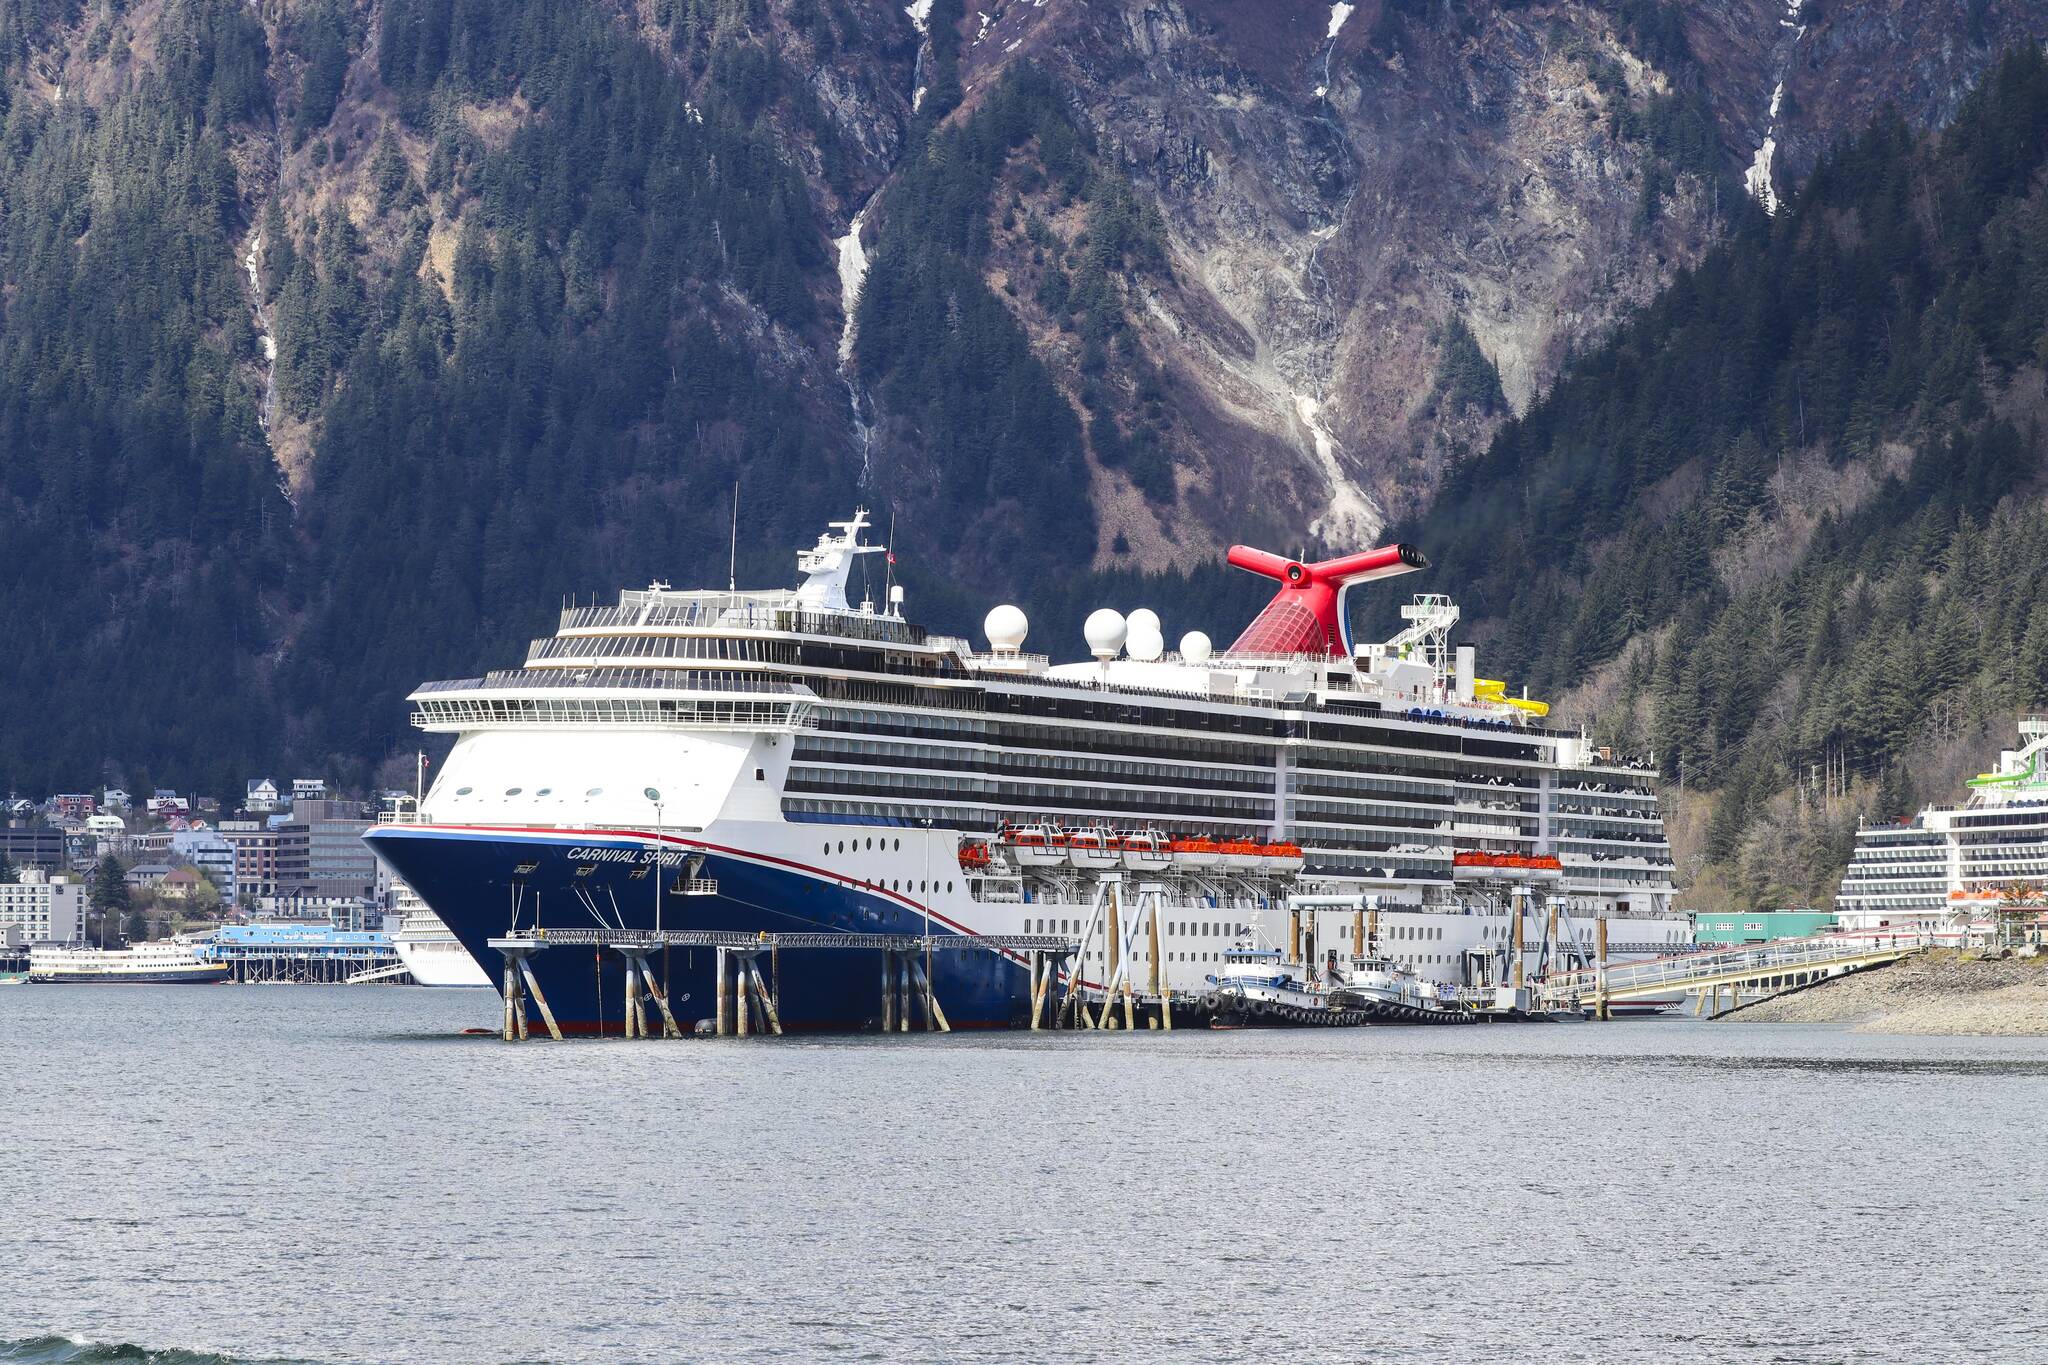 A Carnival cruise ship is berthed Juneau's cruise ship docks during the summer of 2022. (Michael S. Lockett / Juneau Empire FIle)